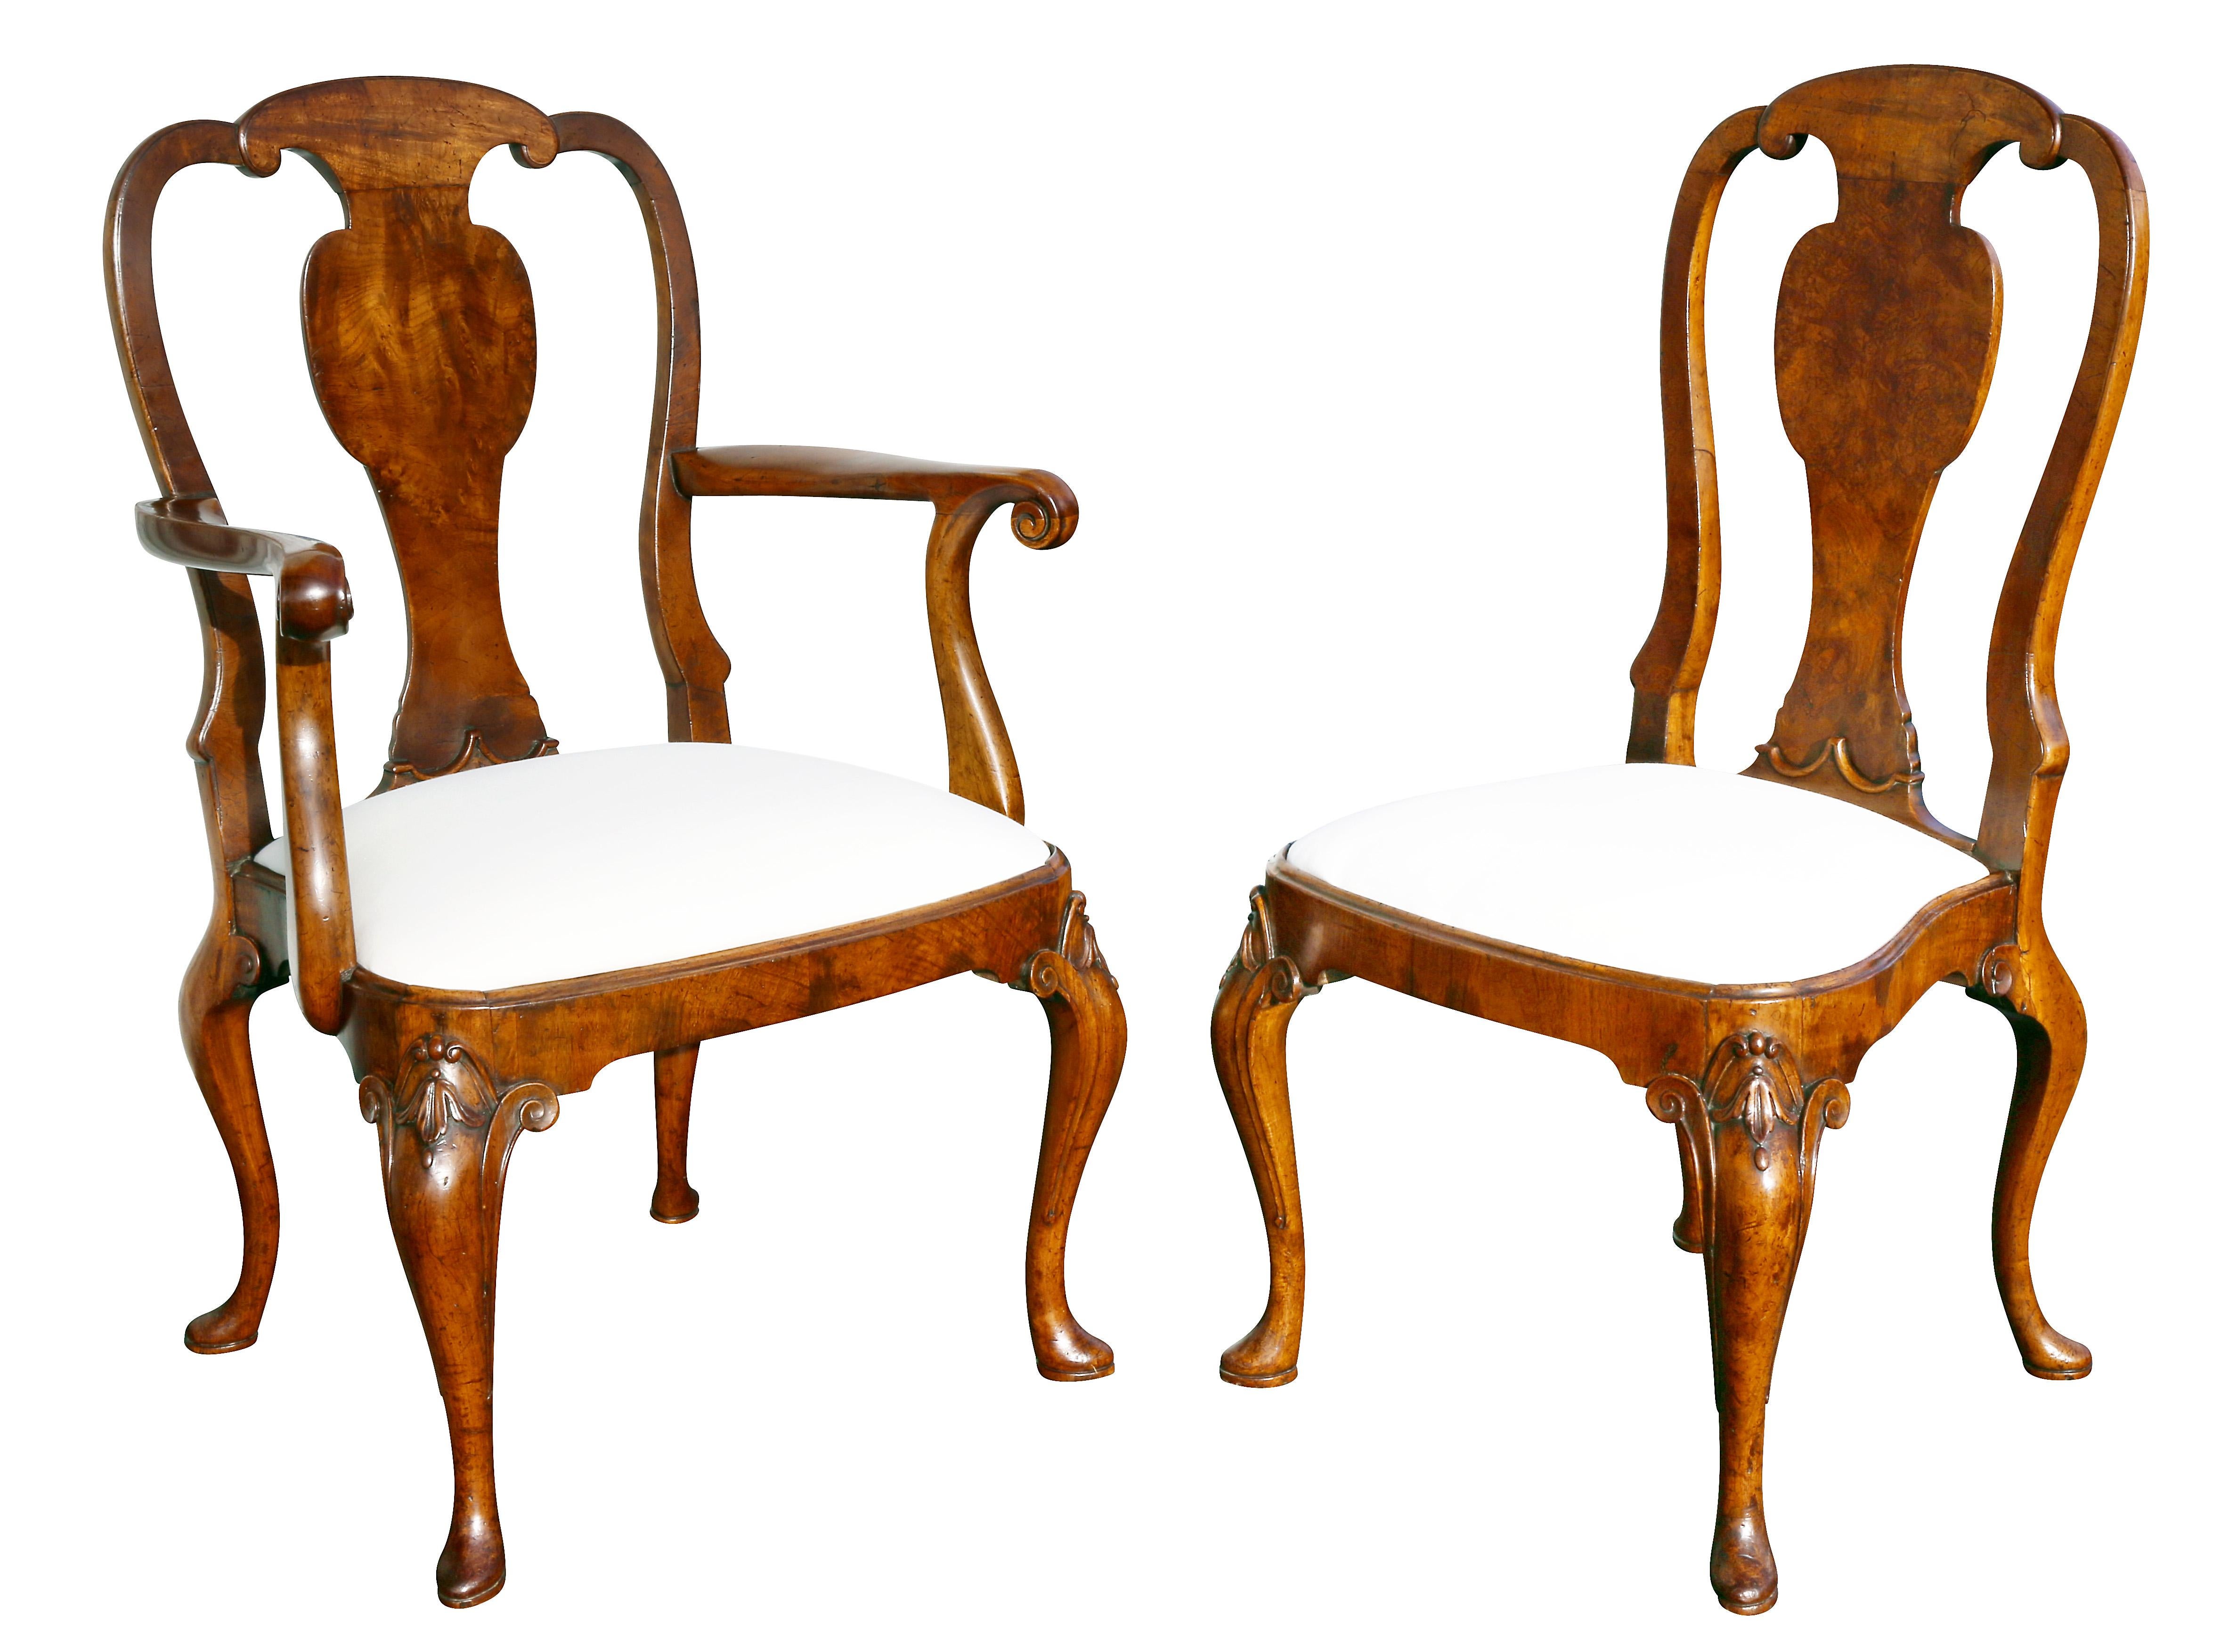 Each with an arched back and vasiform splat with drop in upholstered seat raised on cabriole legs carved with scrolled and bellflower carved knees. Comprising a pair of armchairs and six side chairs.